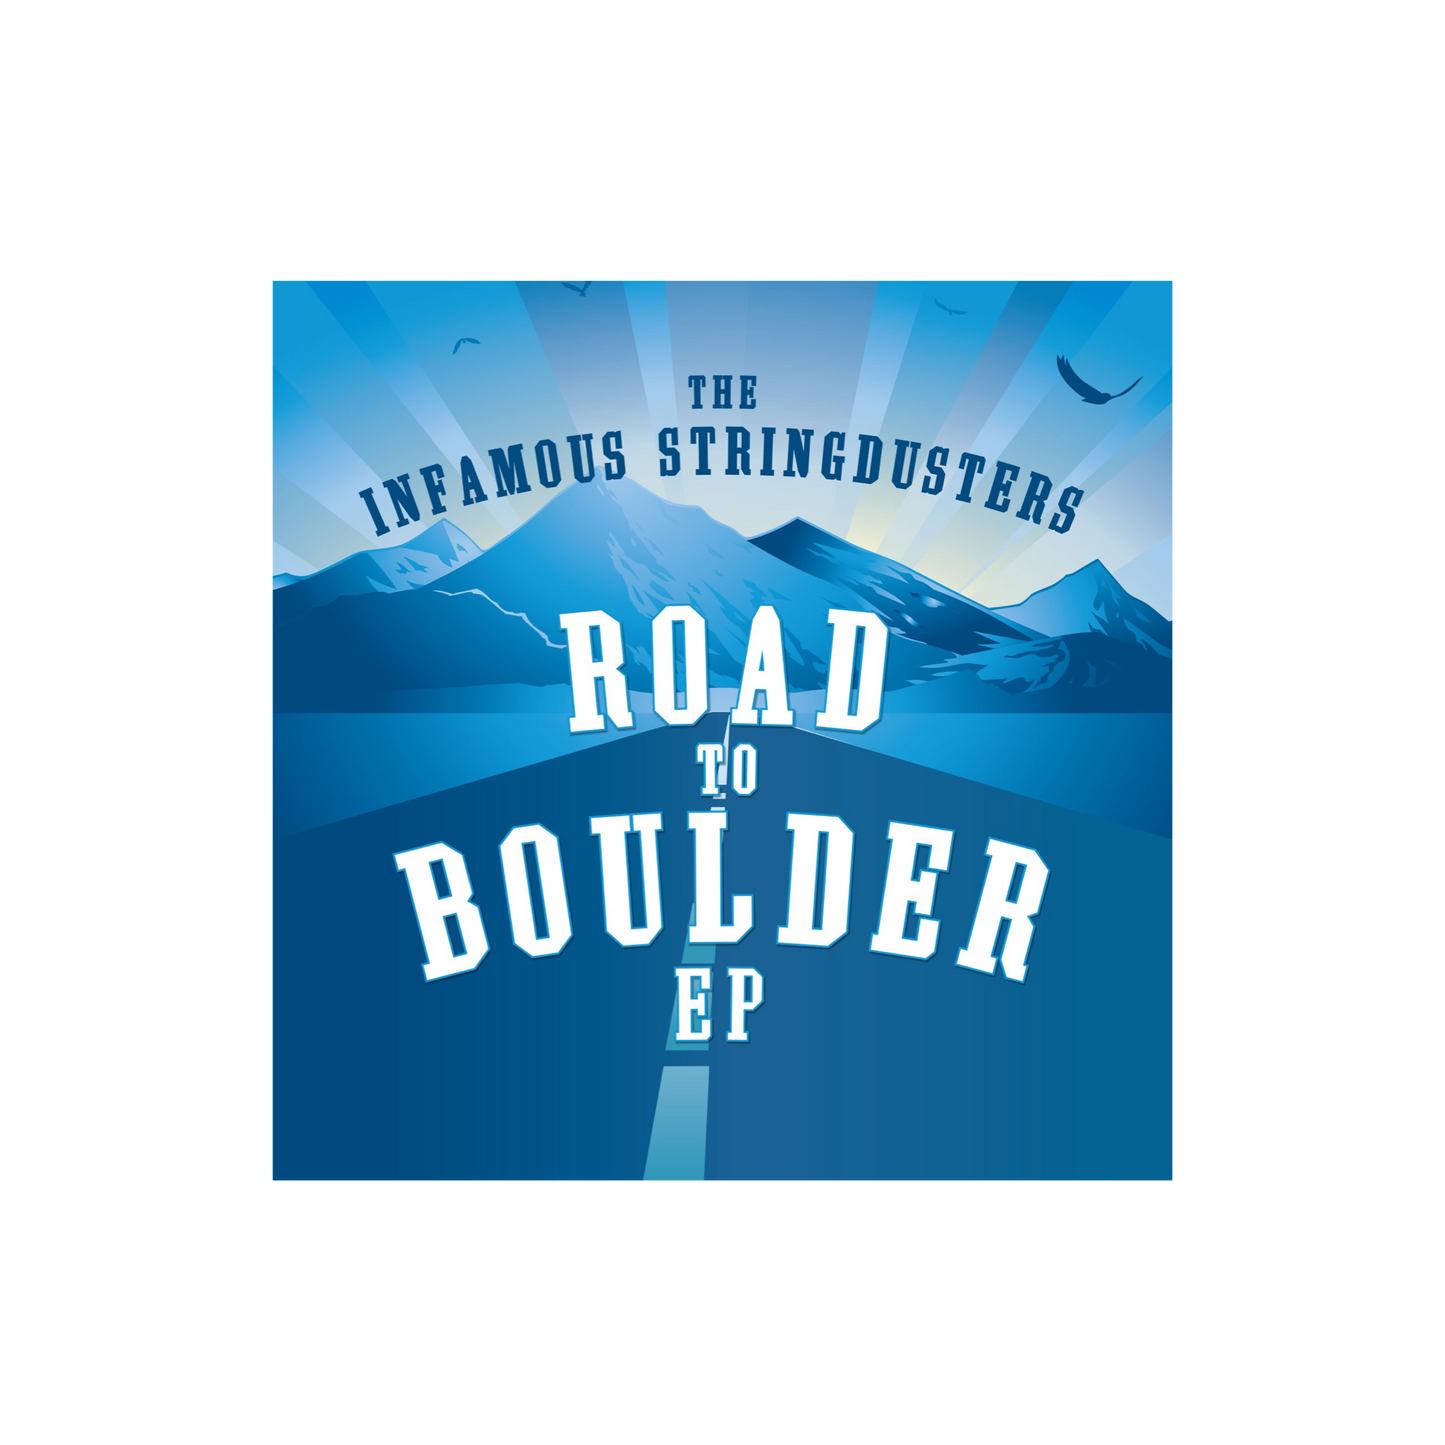 The Infamous Stringdusters - Road to Boulder  Digital Download